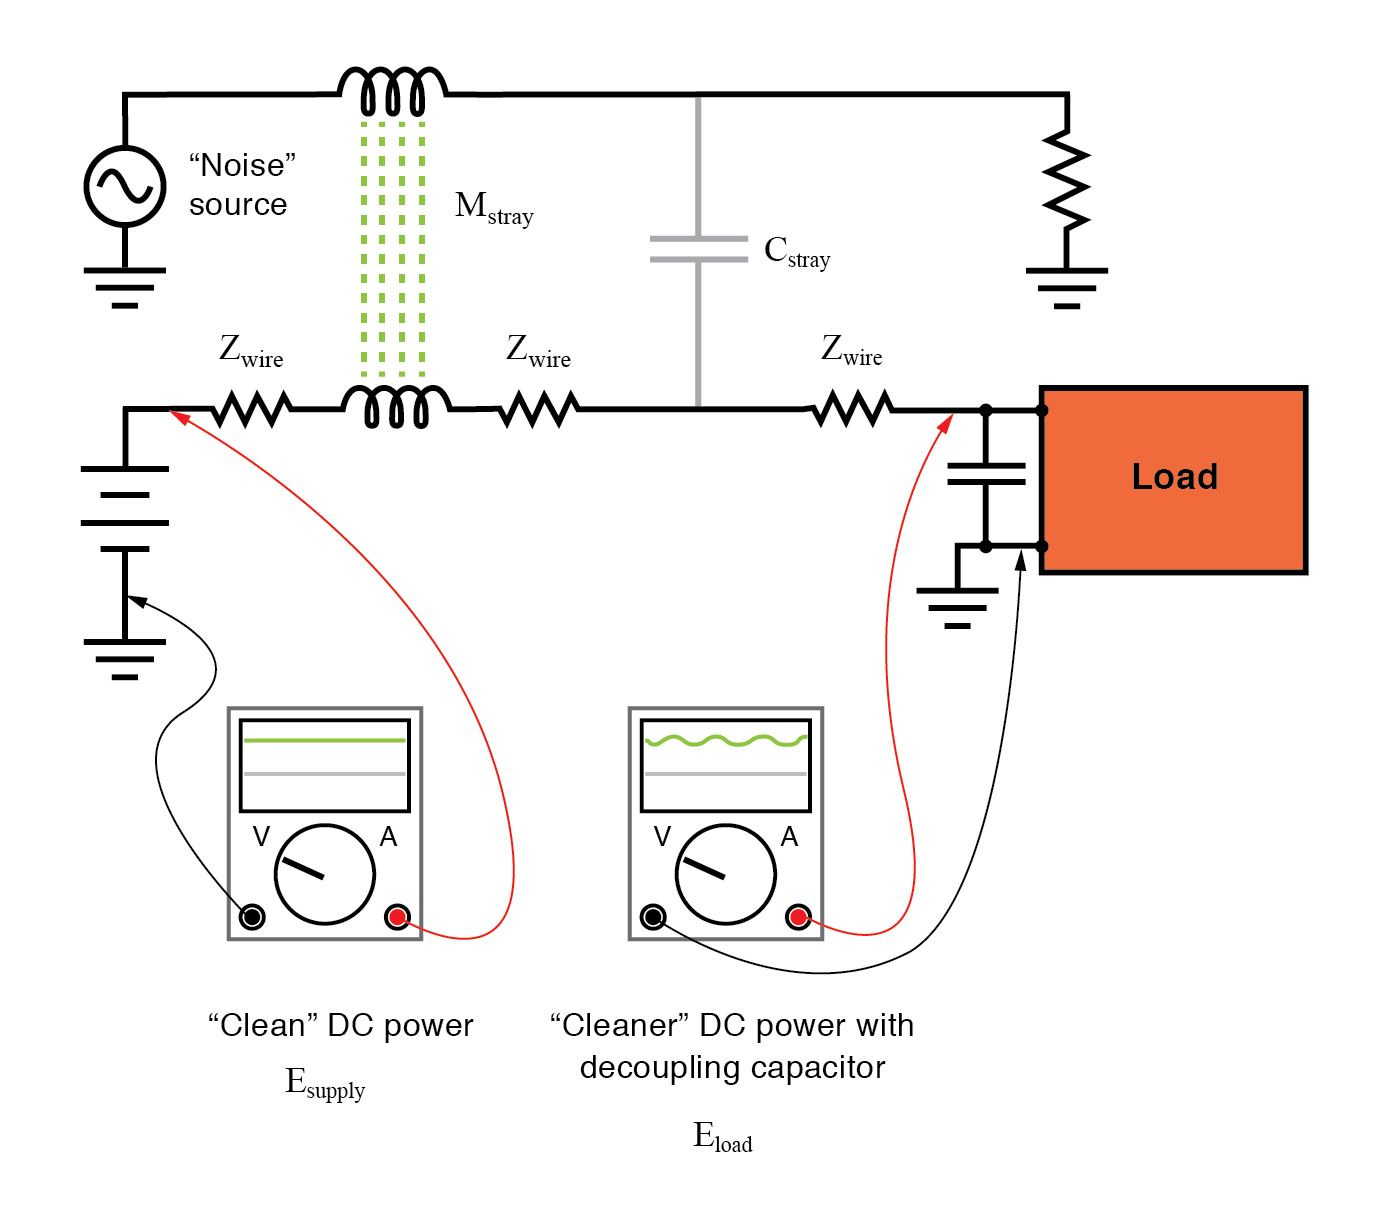 Decoupling capacitor, applied to load, filters noise from DC power supply.